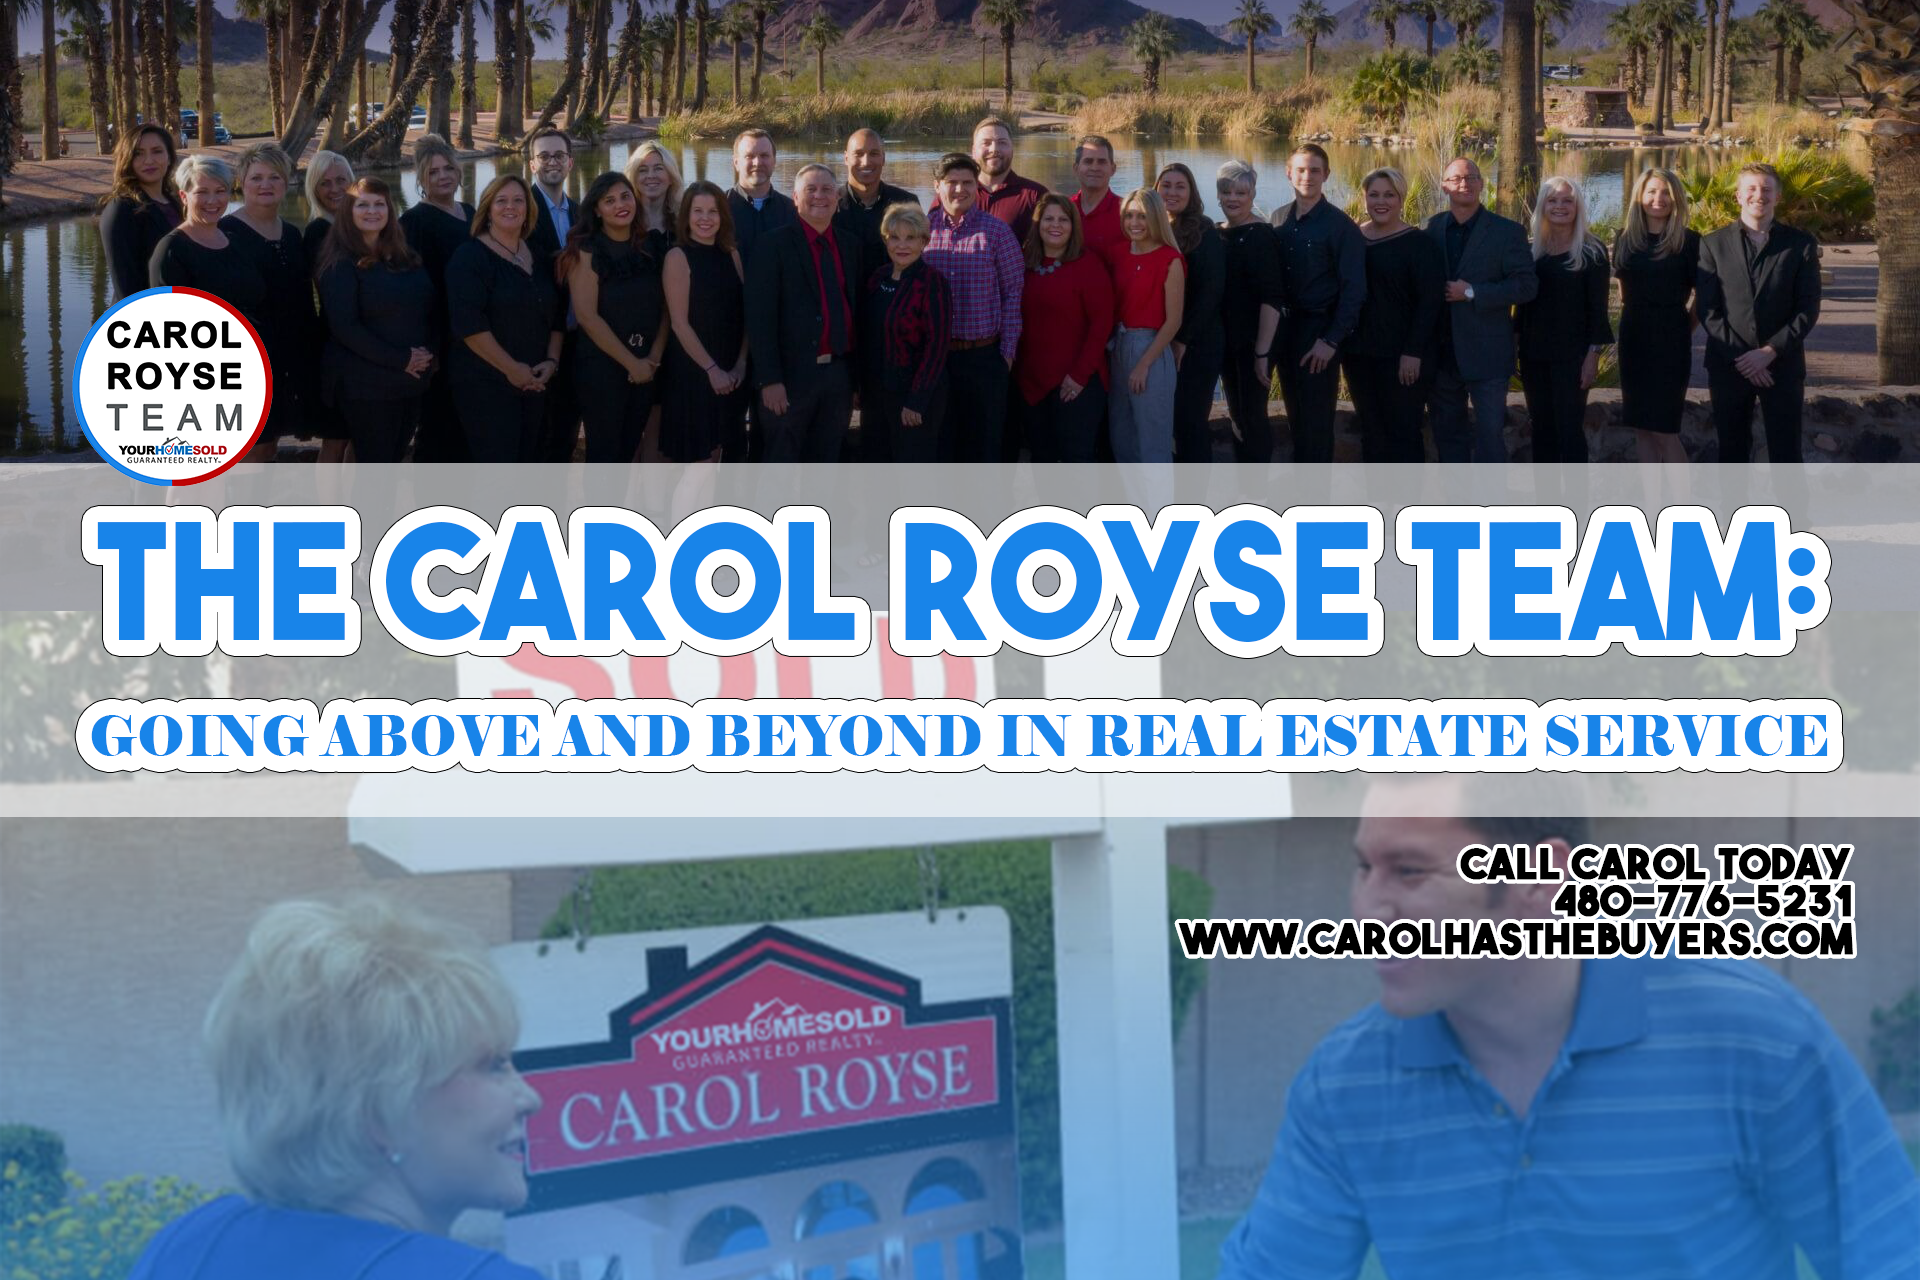 The Carol Royse Team: Going Above and Beyond in Real Estate Service